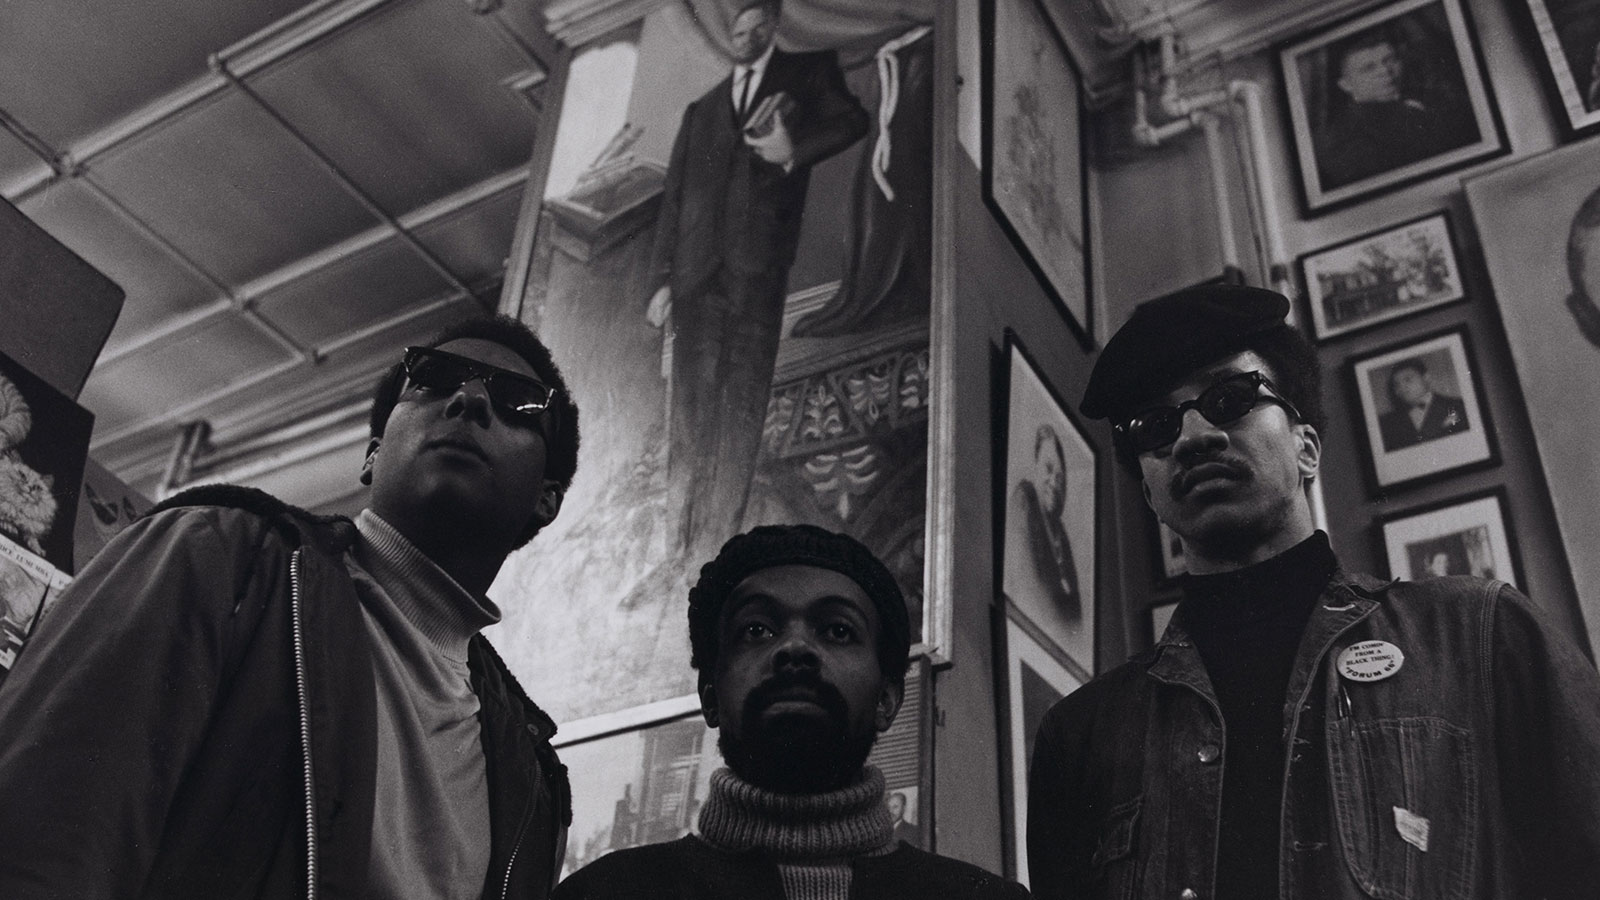 Stokely Carmichael, LeRoi Jones and Al-Amin, far right, at Michaux’s, a bookstore in Harlem, in 1976 